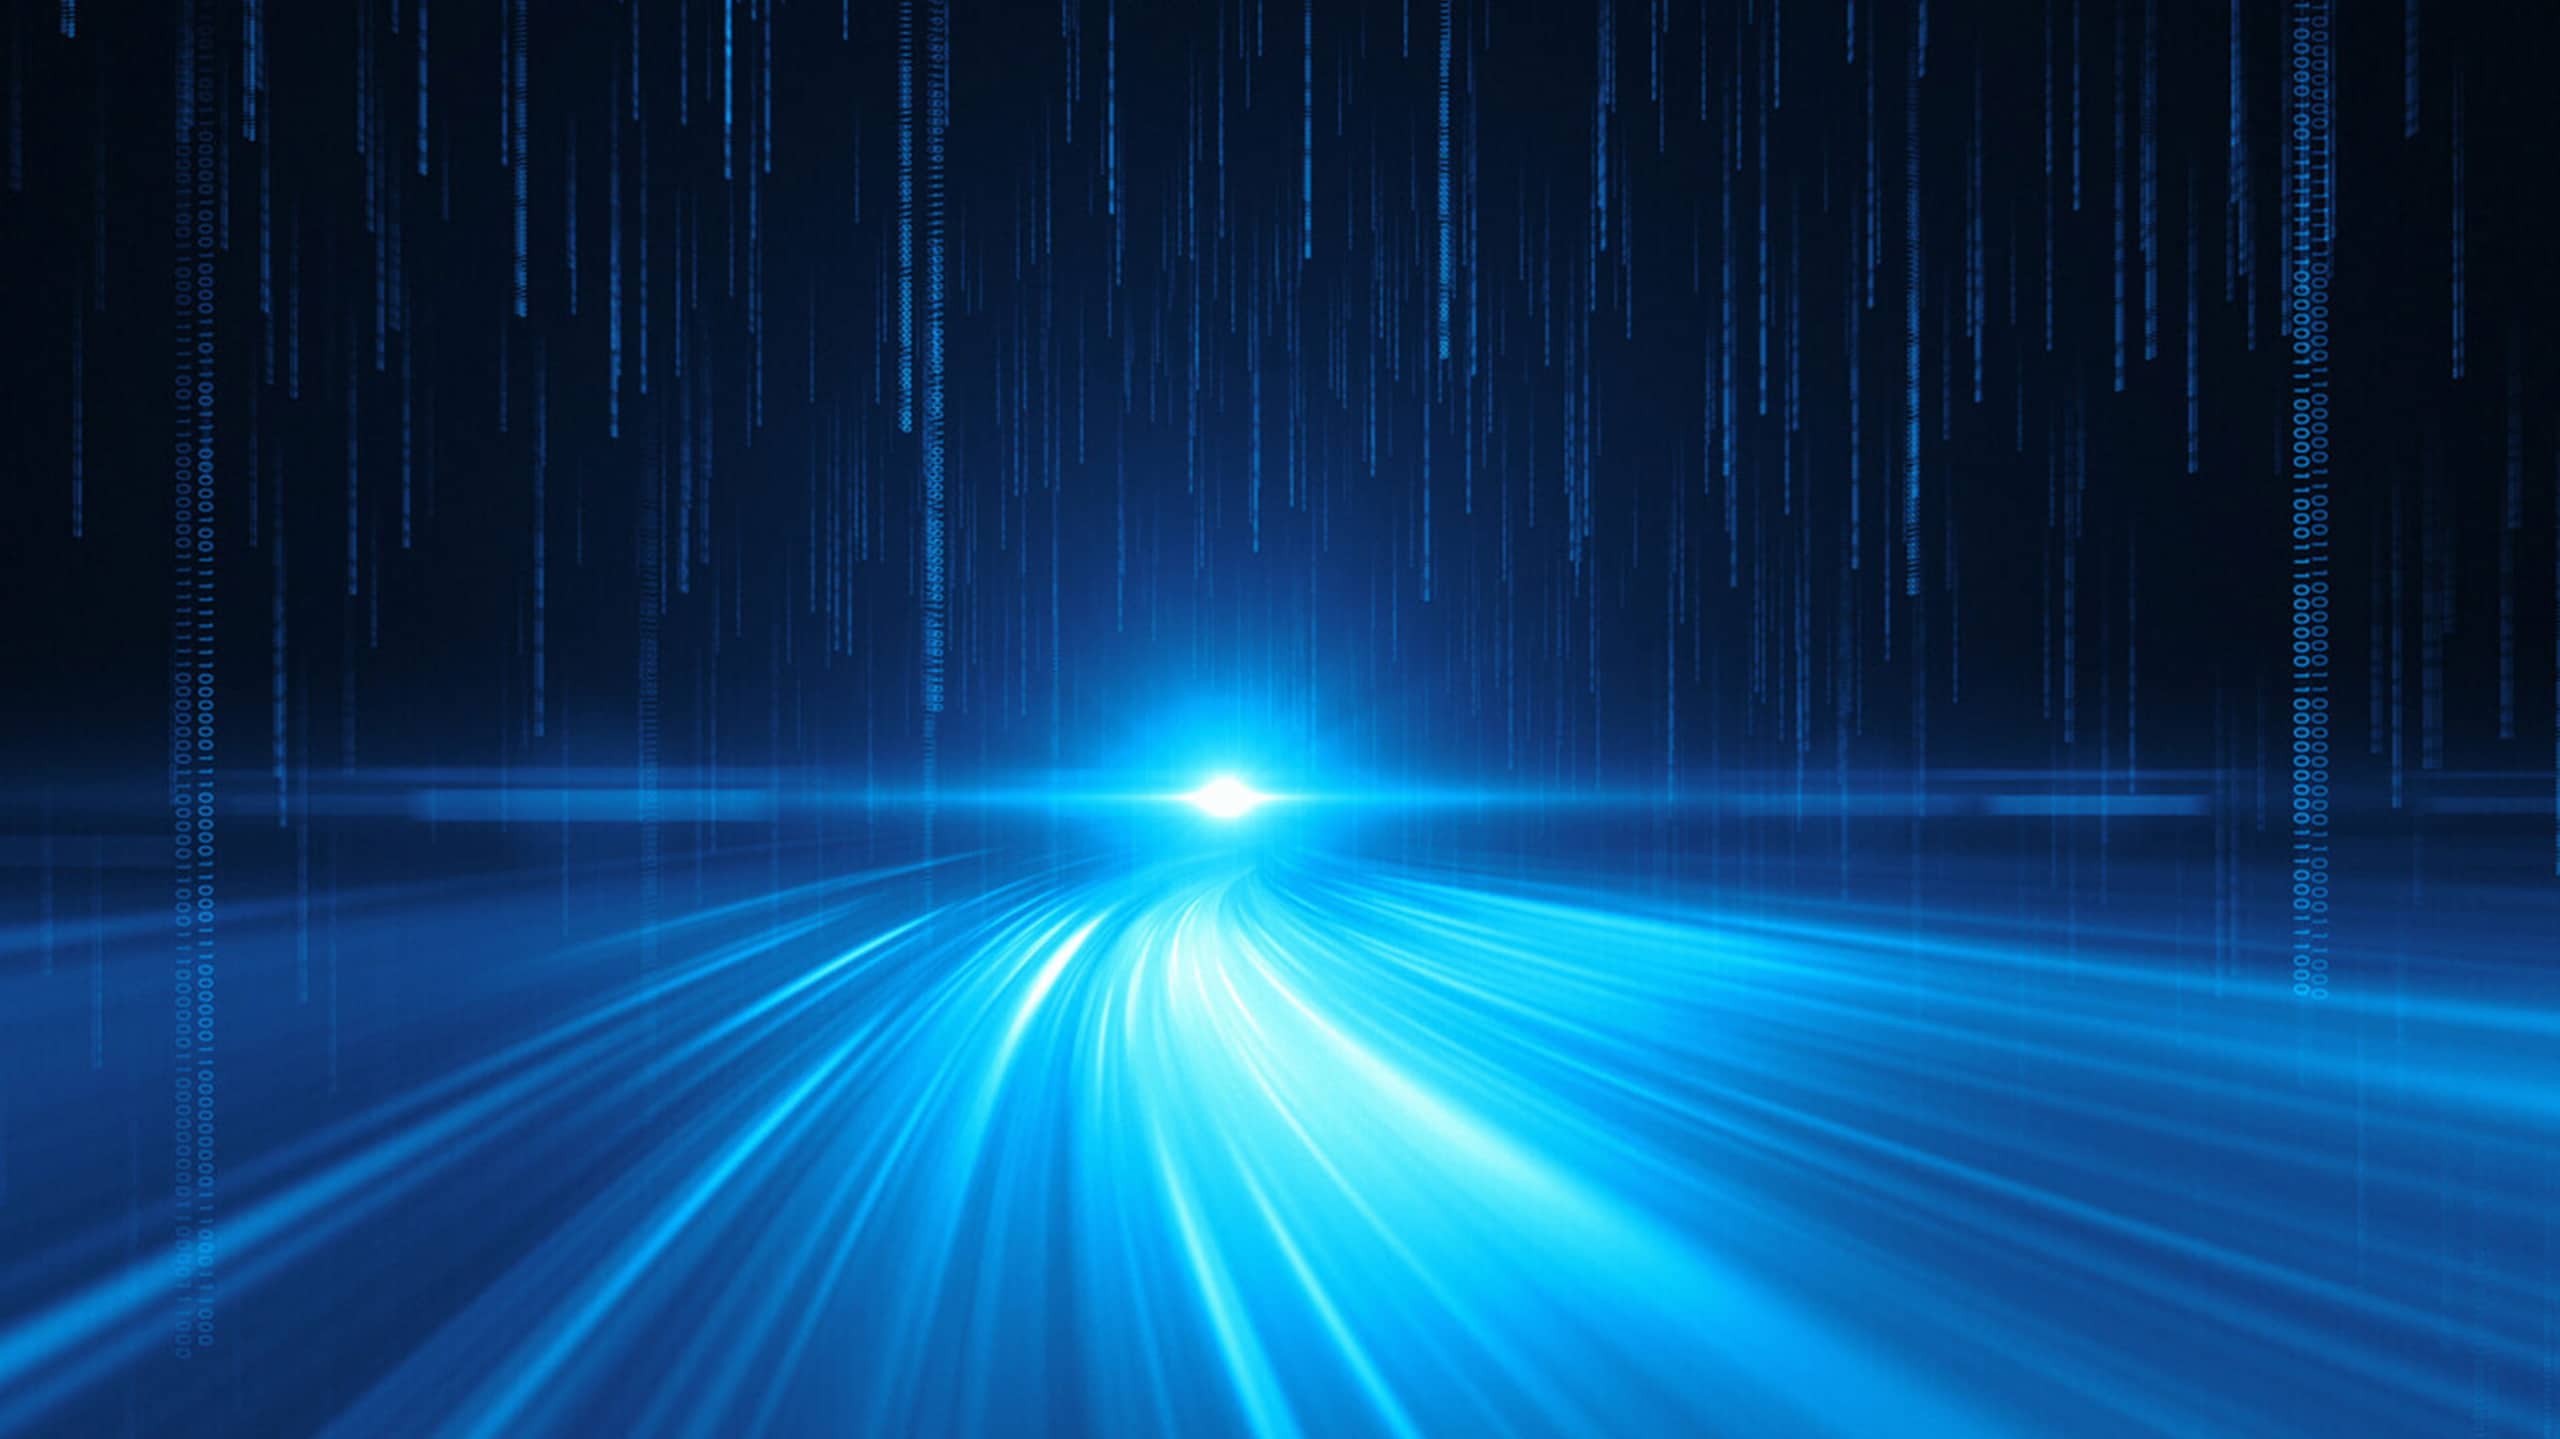 Abstract digital wallpaper featuring a bright light at the center with blue light rays and streaming lines of binary code against a dark background, reminiscent of Iris Investigate enhancements in a high-speed data network or virtual reality